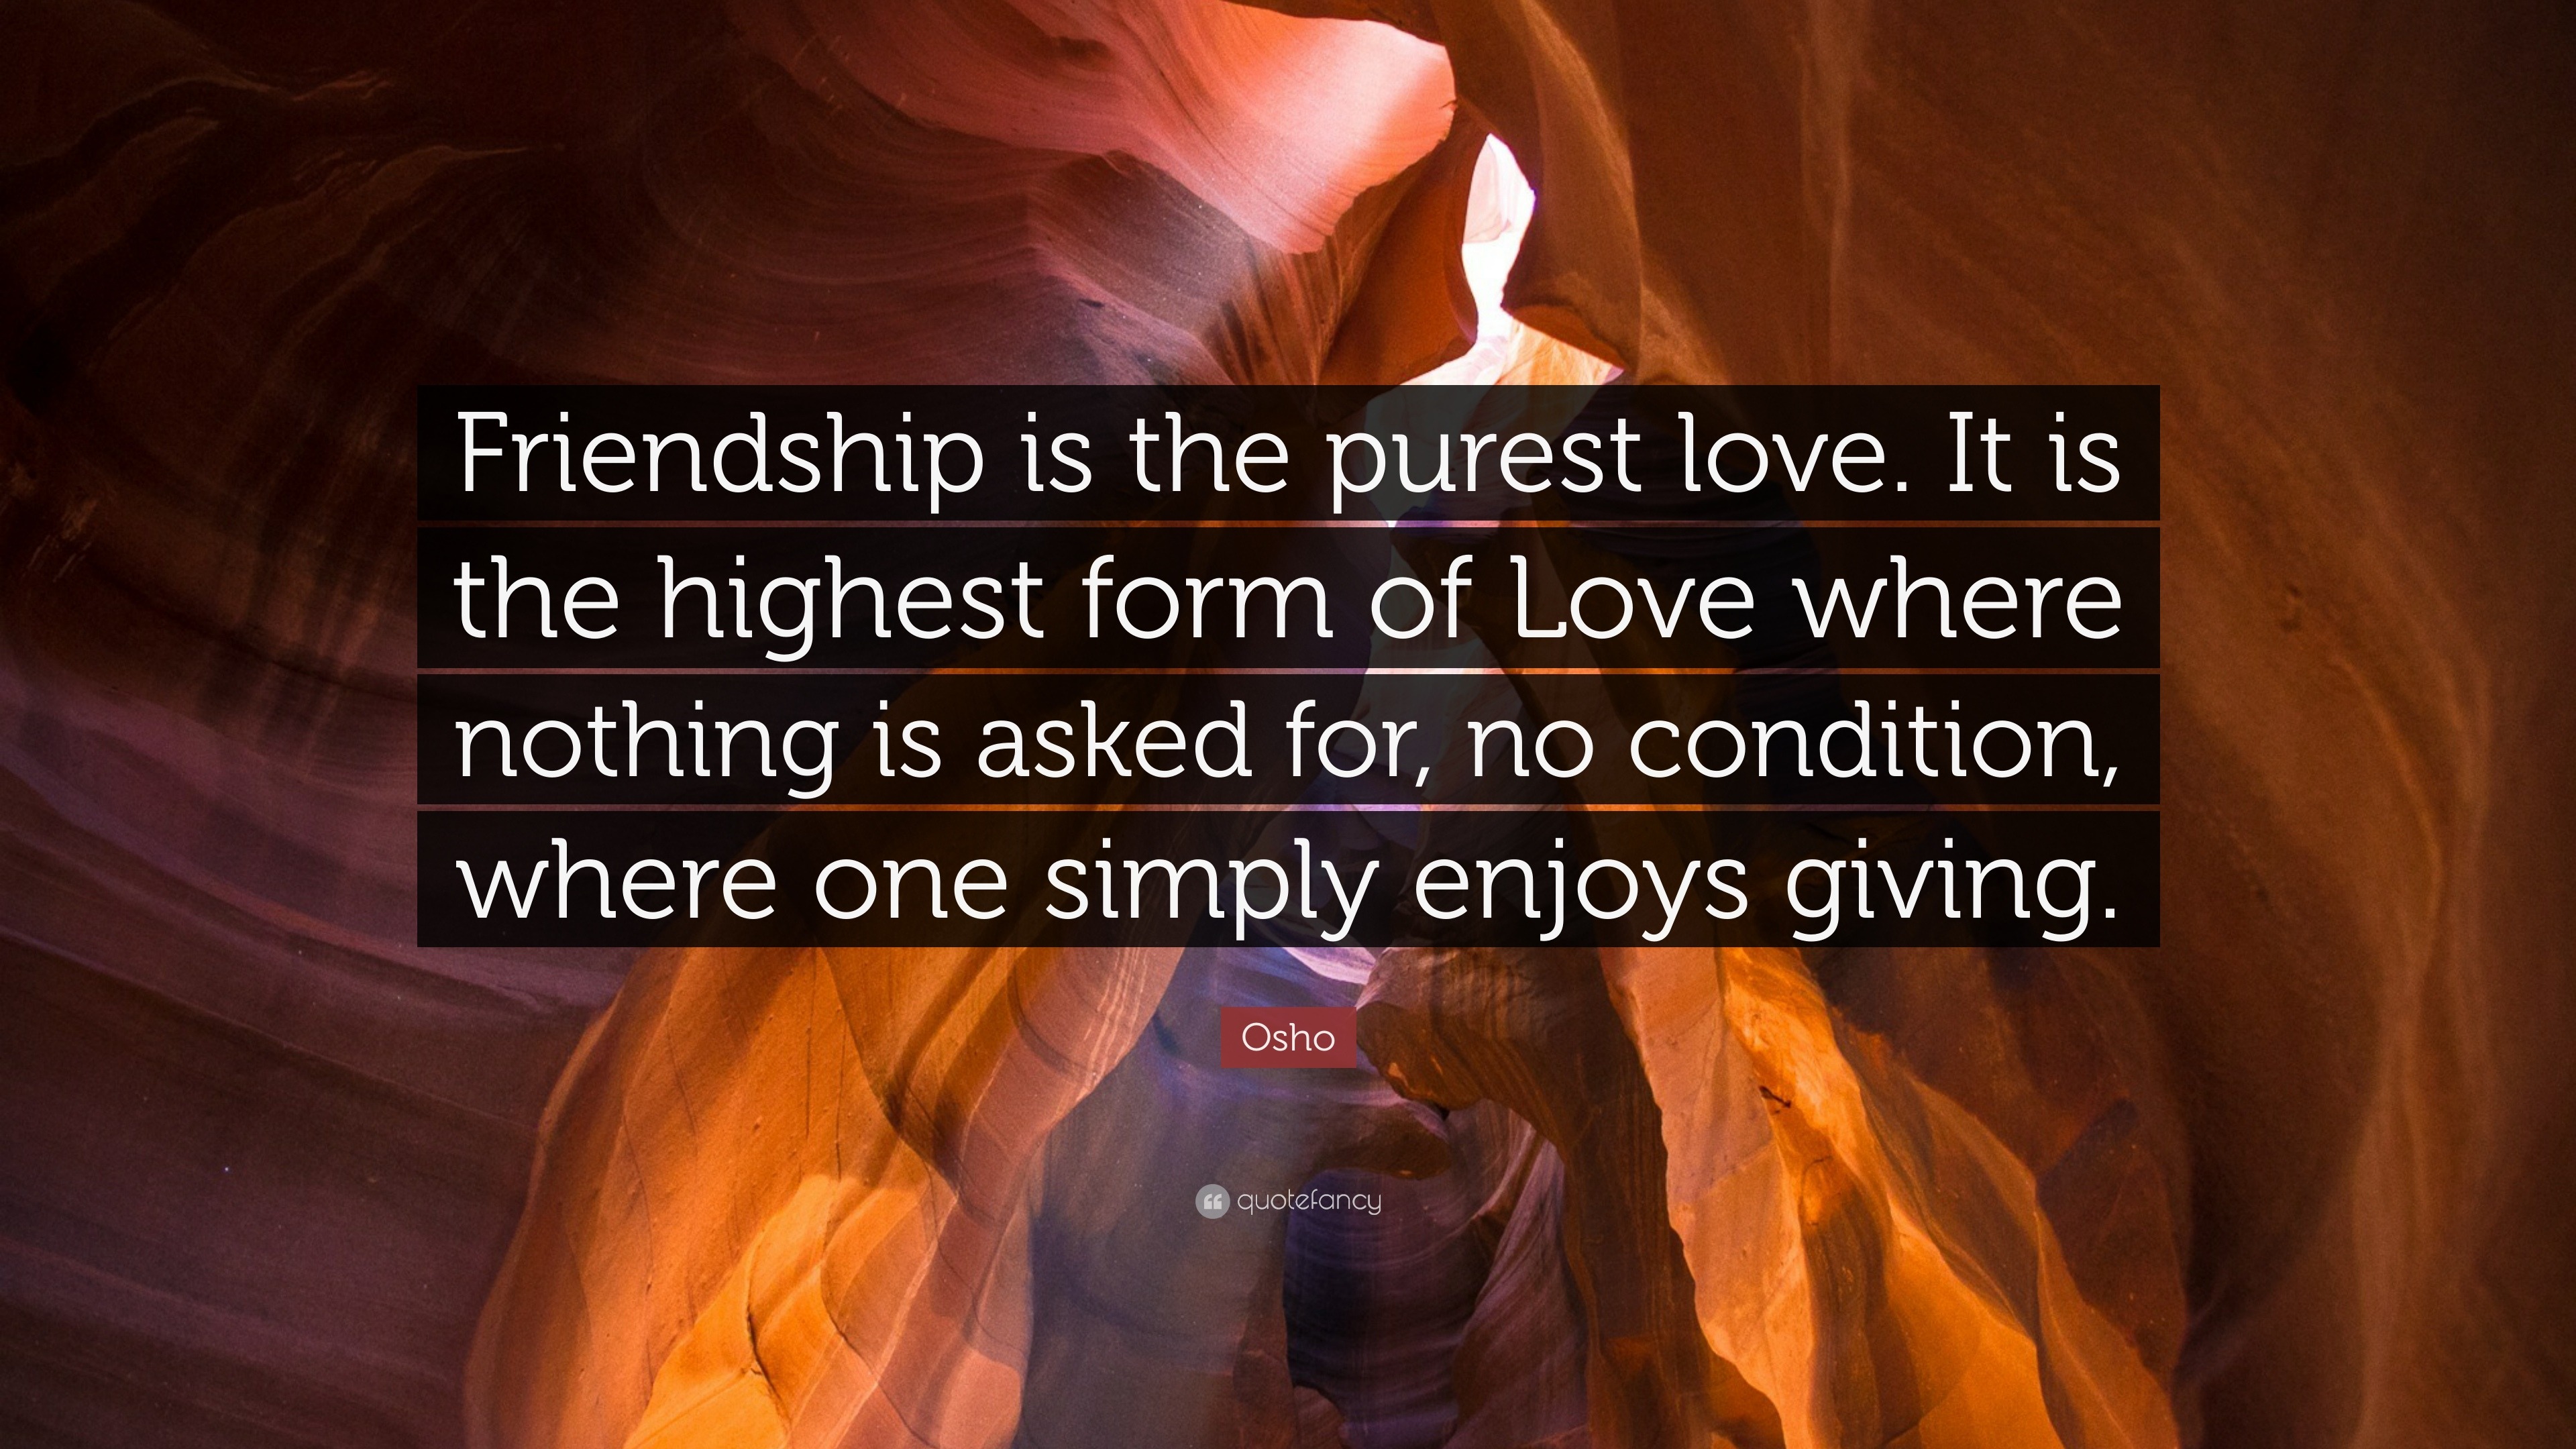 Osho Quote: “Friendship is the purest love. It is the highest form